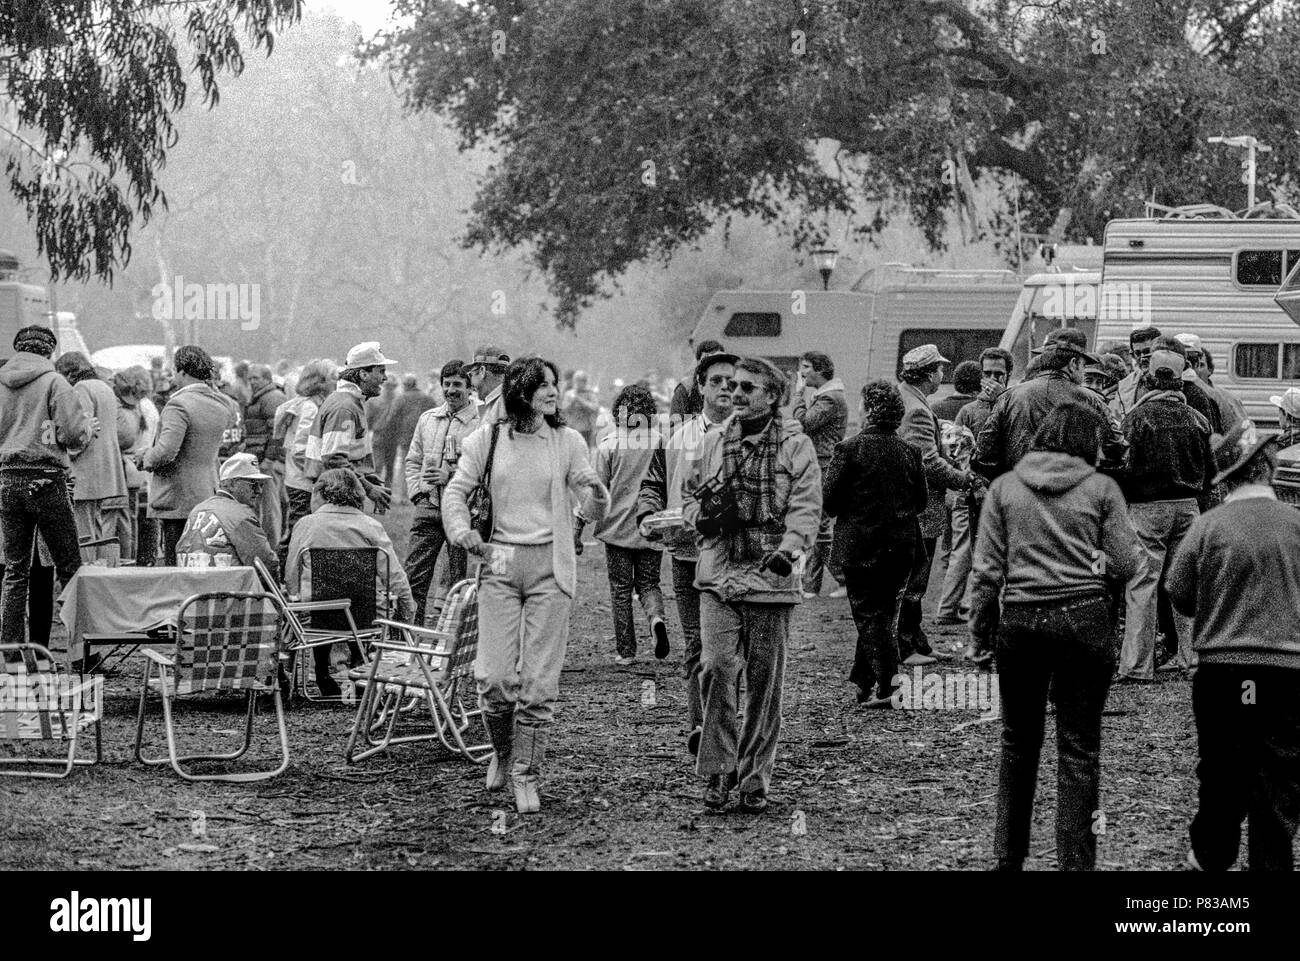 Stanford, California, USA. 20th Jan, 1985. Fans enjoy walking in the cool, foggy morning at the Super Bowl XIX tailgate on the Stanford University campus. The San Francisco 49ers defeated the Miami Dolphins 38-16 on Sunday, January 20, 1985. Credit: Al Golub/ZUMA Wire/Alamy Live News Stock Photo